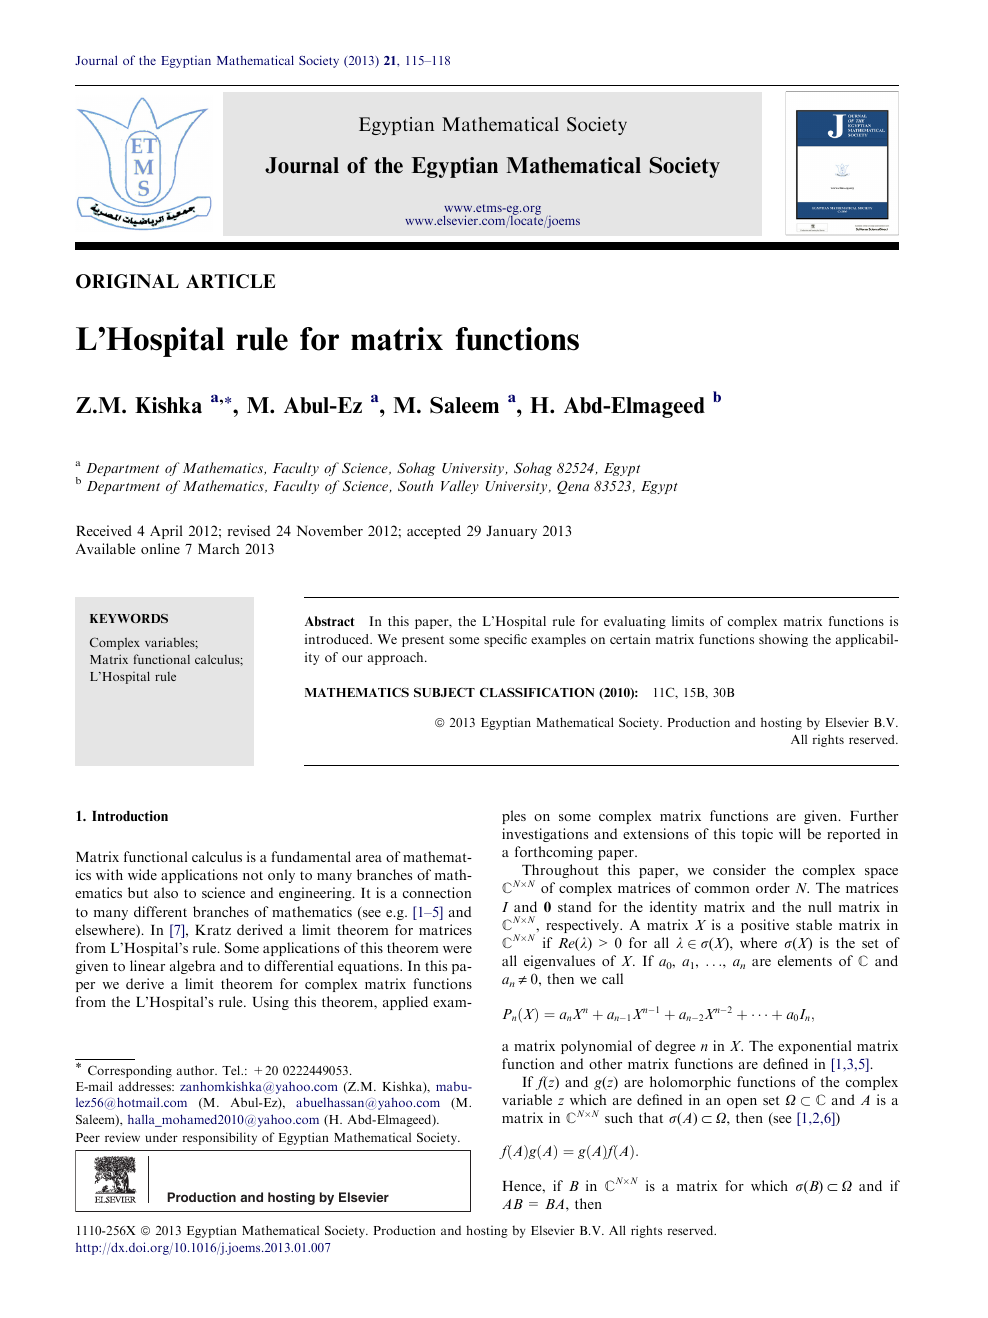 L Hospital Rule For Matrix Functions Topic Of Research Paper In Physical Sciences Download Scholarly Article Pdf And Read For Free On Cyberleninka Open Science Hub